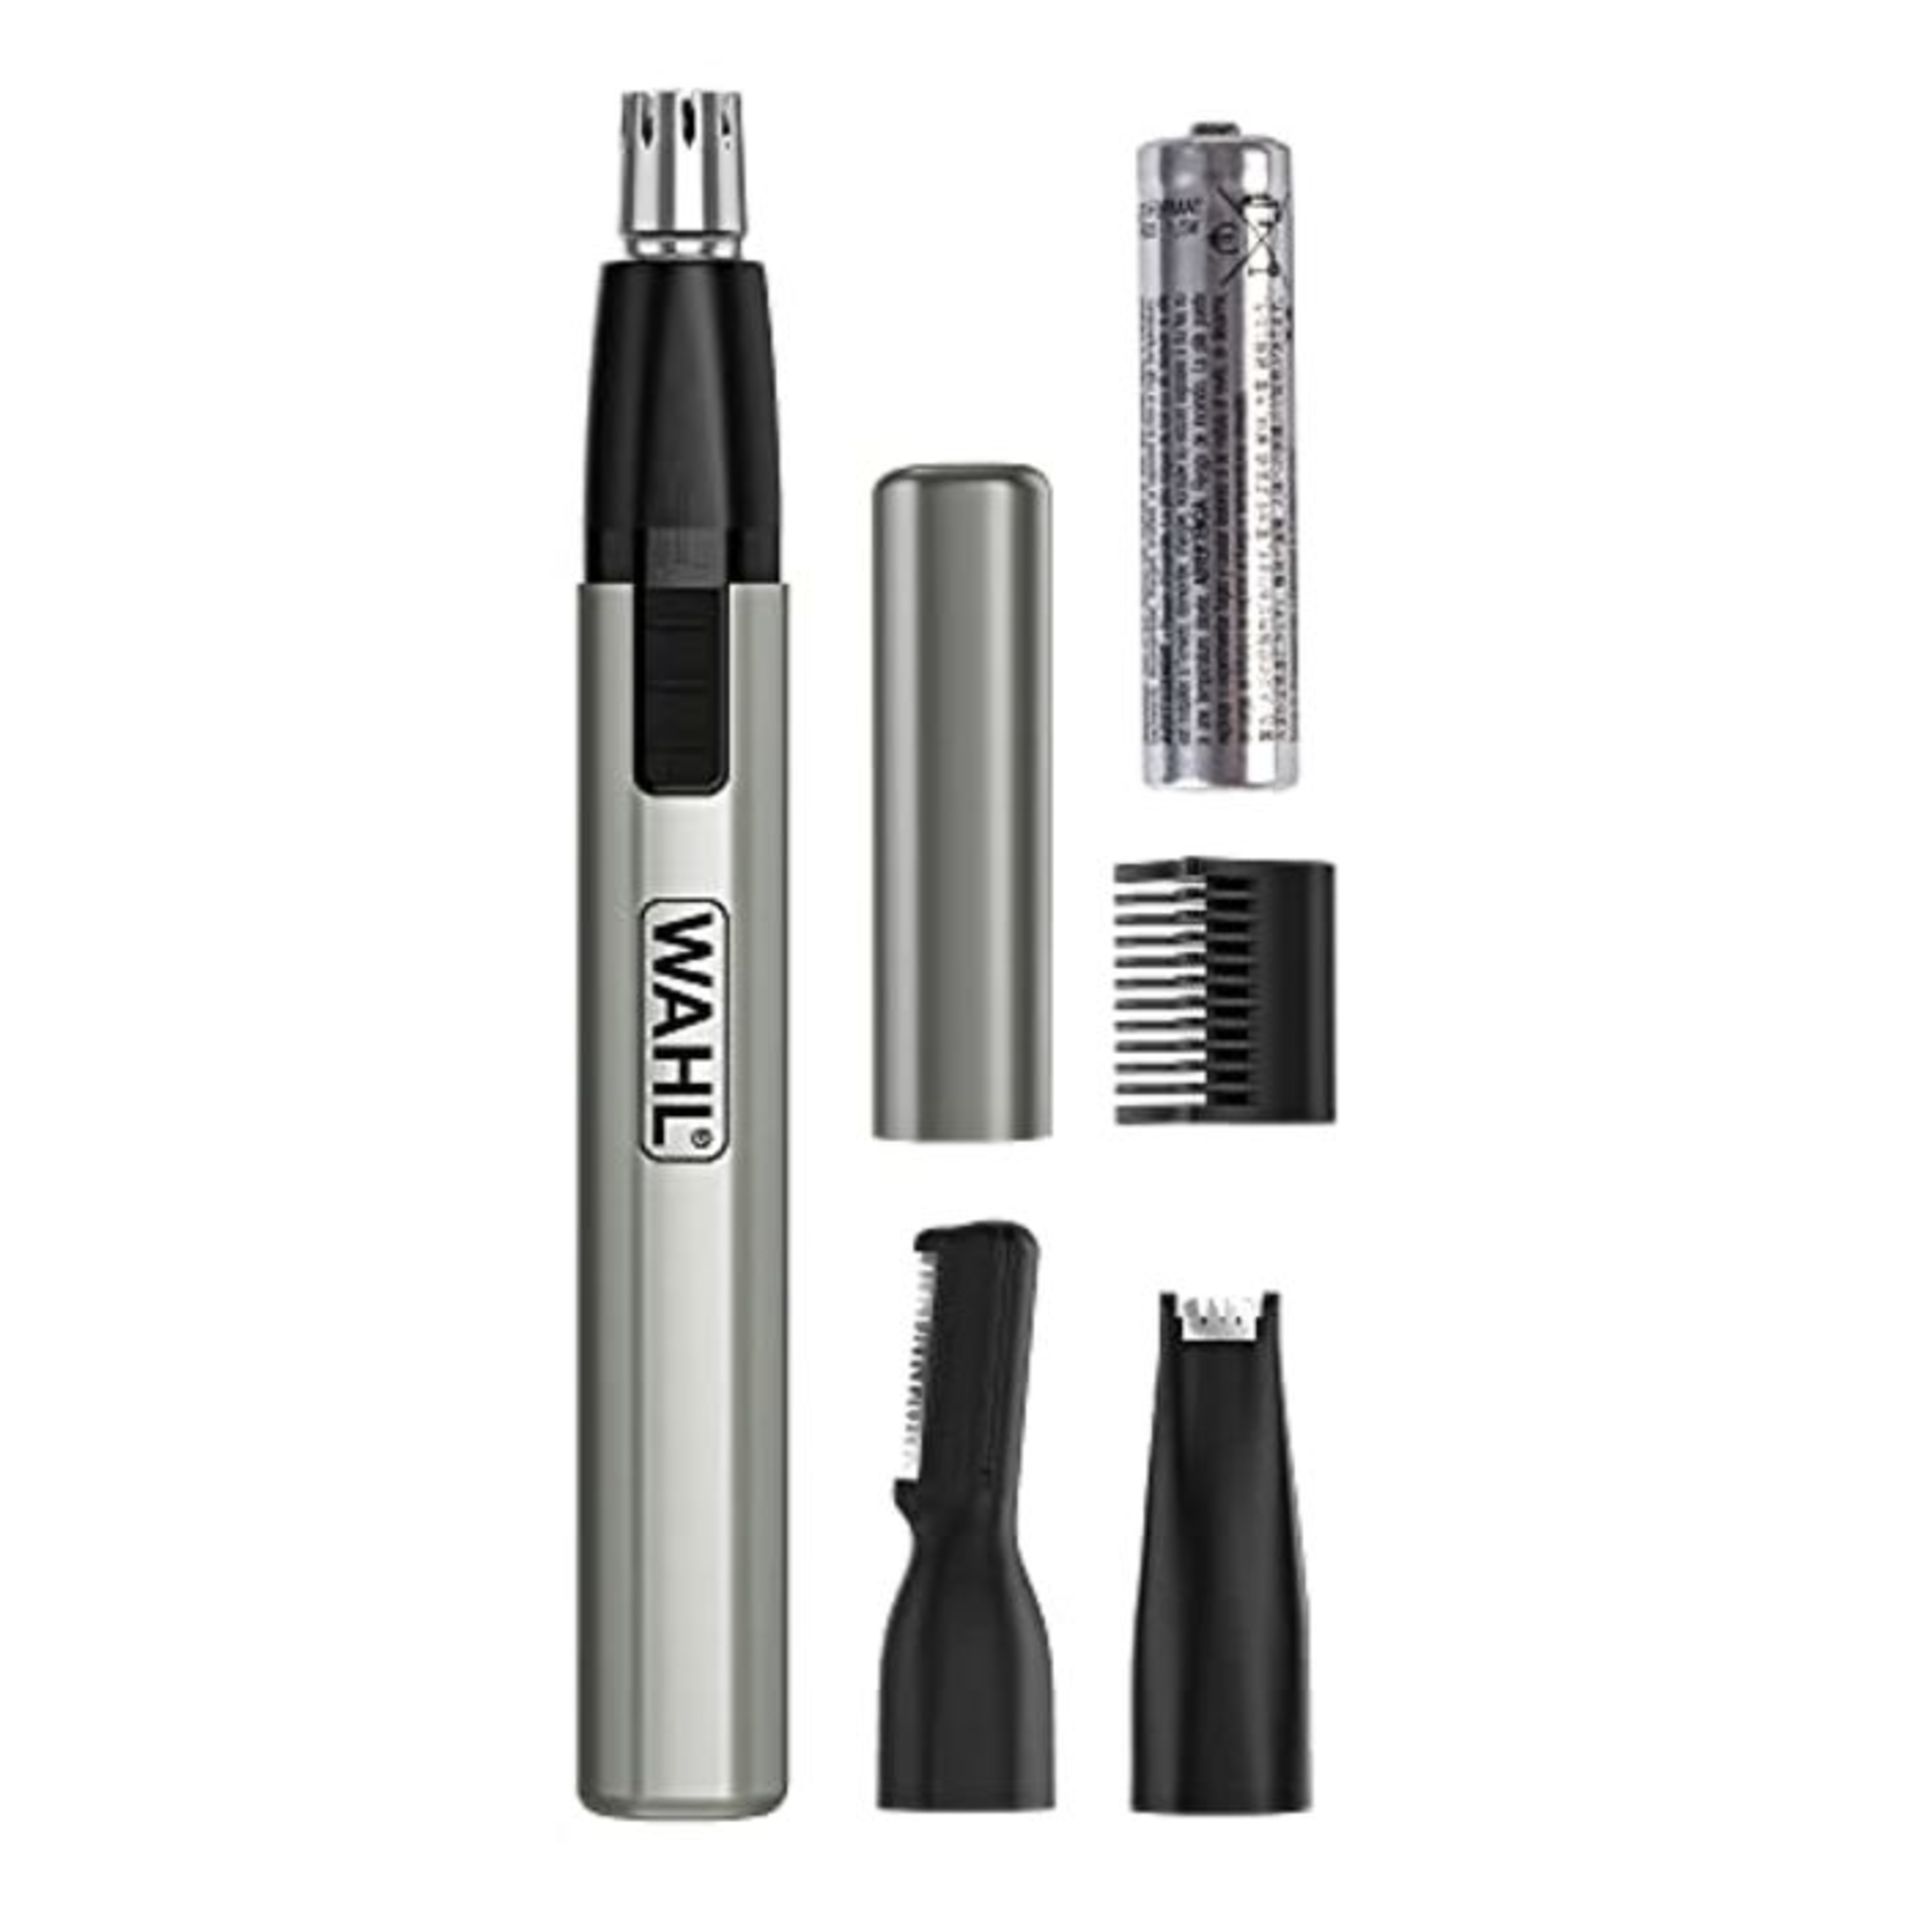 Wahl Micro Finisher Nose Hair Trimmer for Men and Women 3-in-1 Nose Trimmer and Ear an